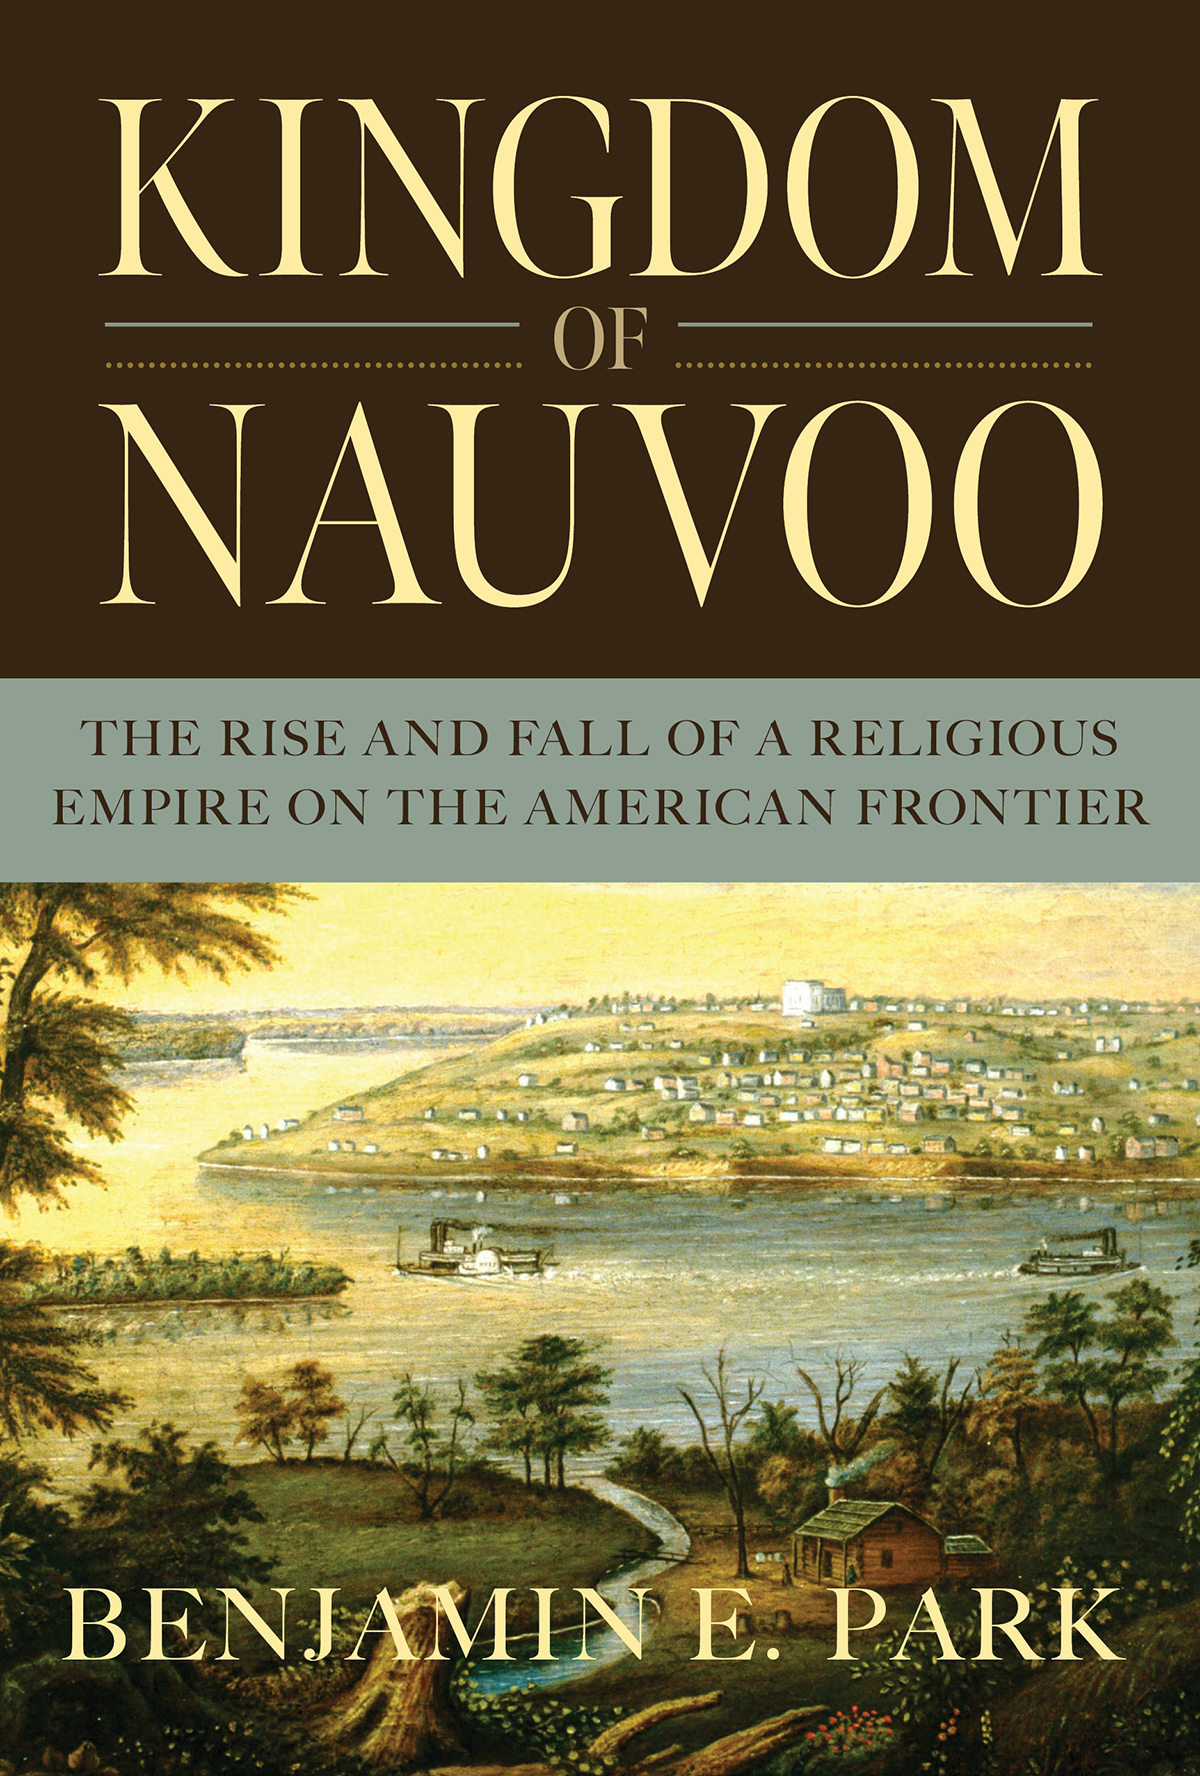 Contents KINGDOM of NAUVOO THE RISE AND FALL OF A RELIGIOUS EMPIRE ON THE - photo 1